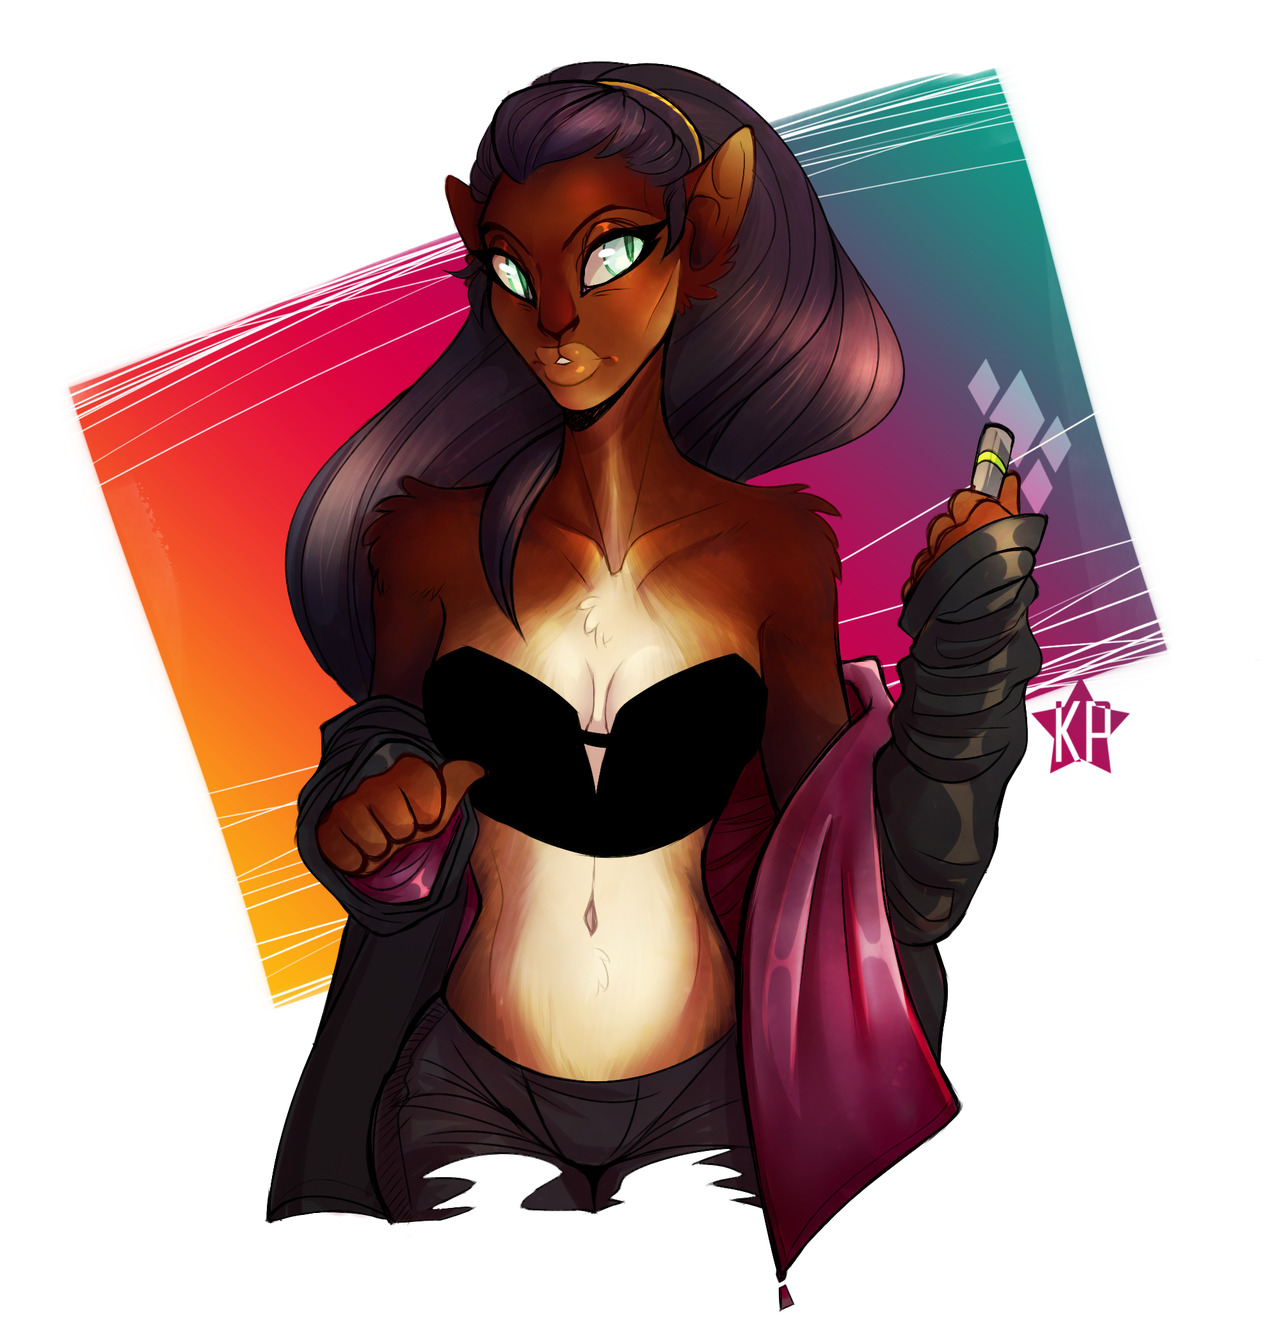 rina-monster: An awesomely coloured cathar commission I did for my May intake!  